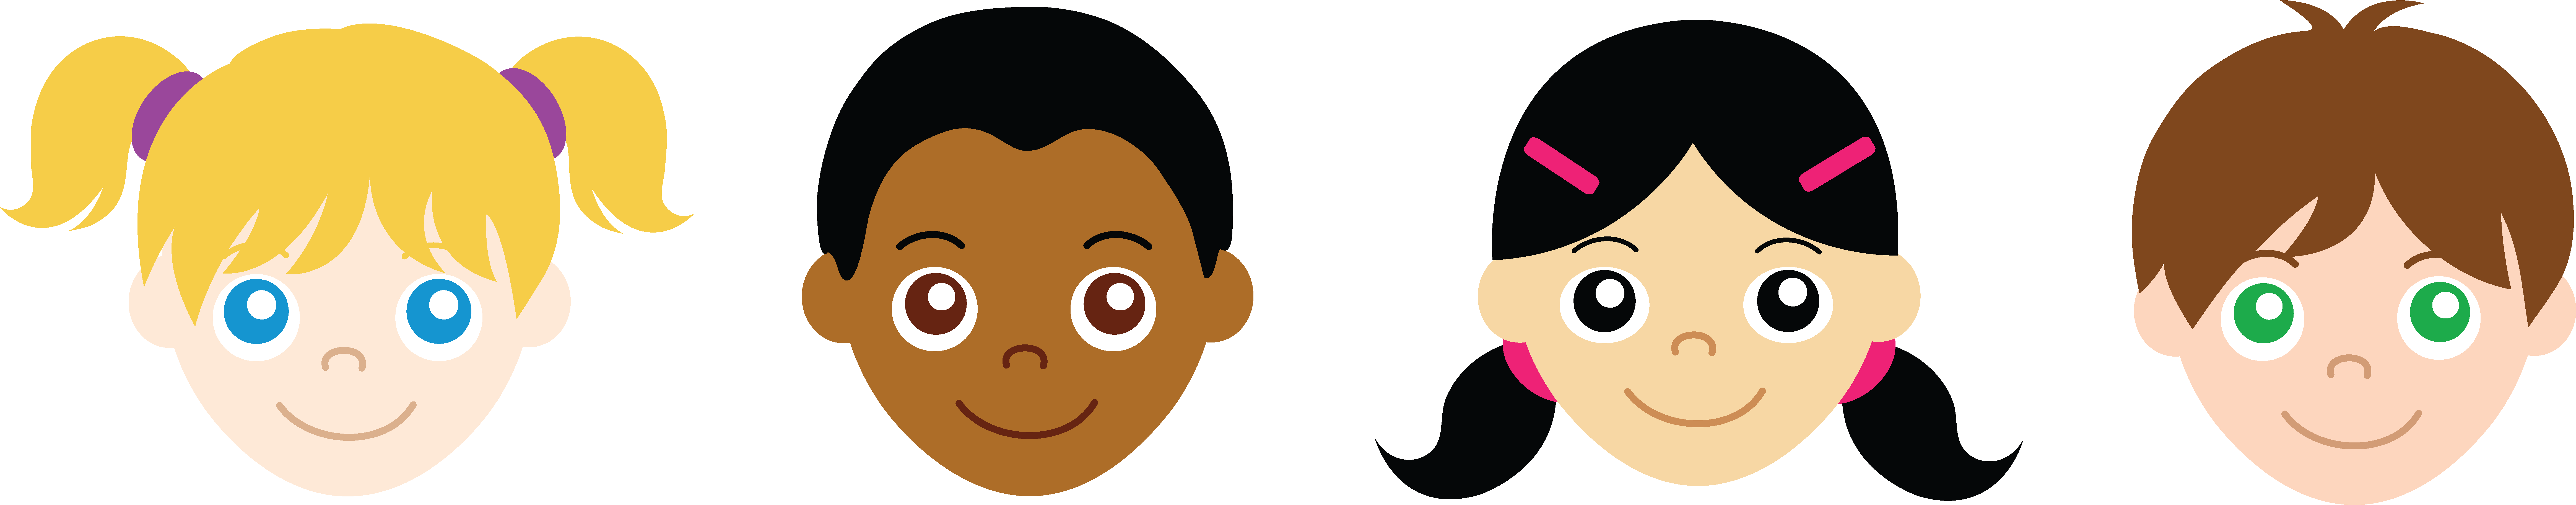 Download PNG image - Cute Kids PNG Picture 